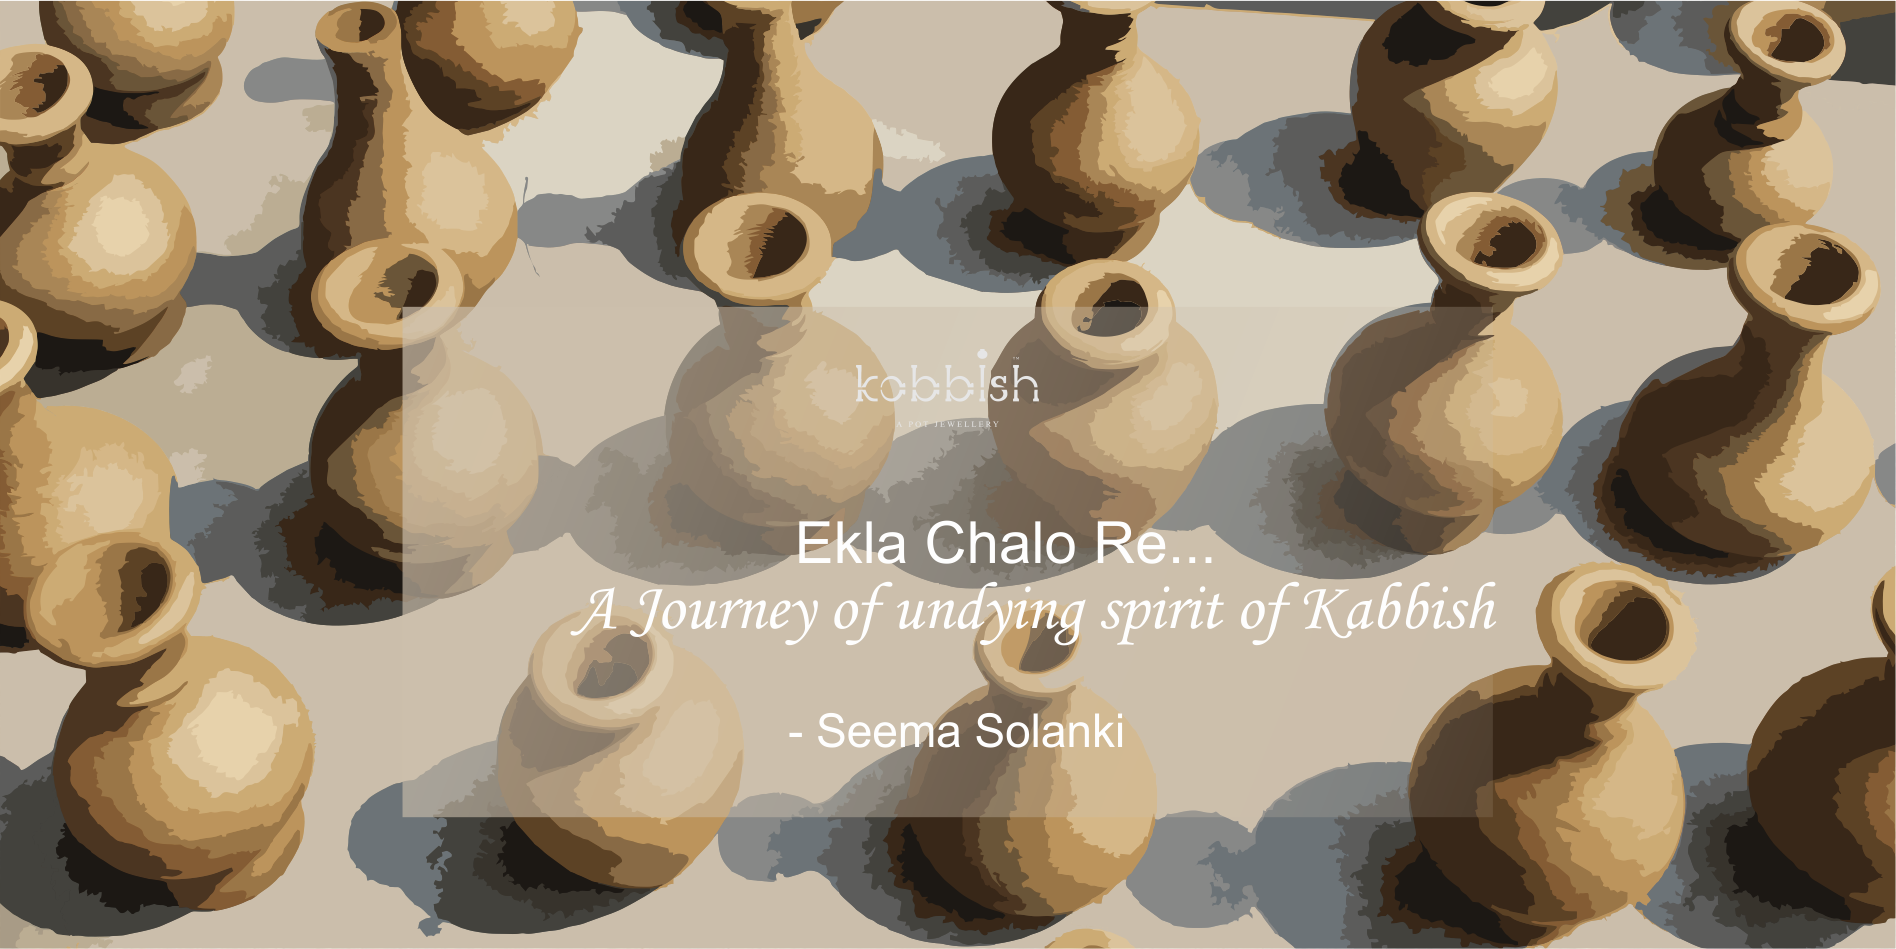 Ekla Chalo RE – A Journey of Undying Sprit of Kabbish